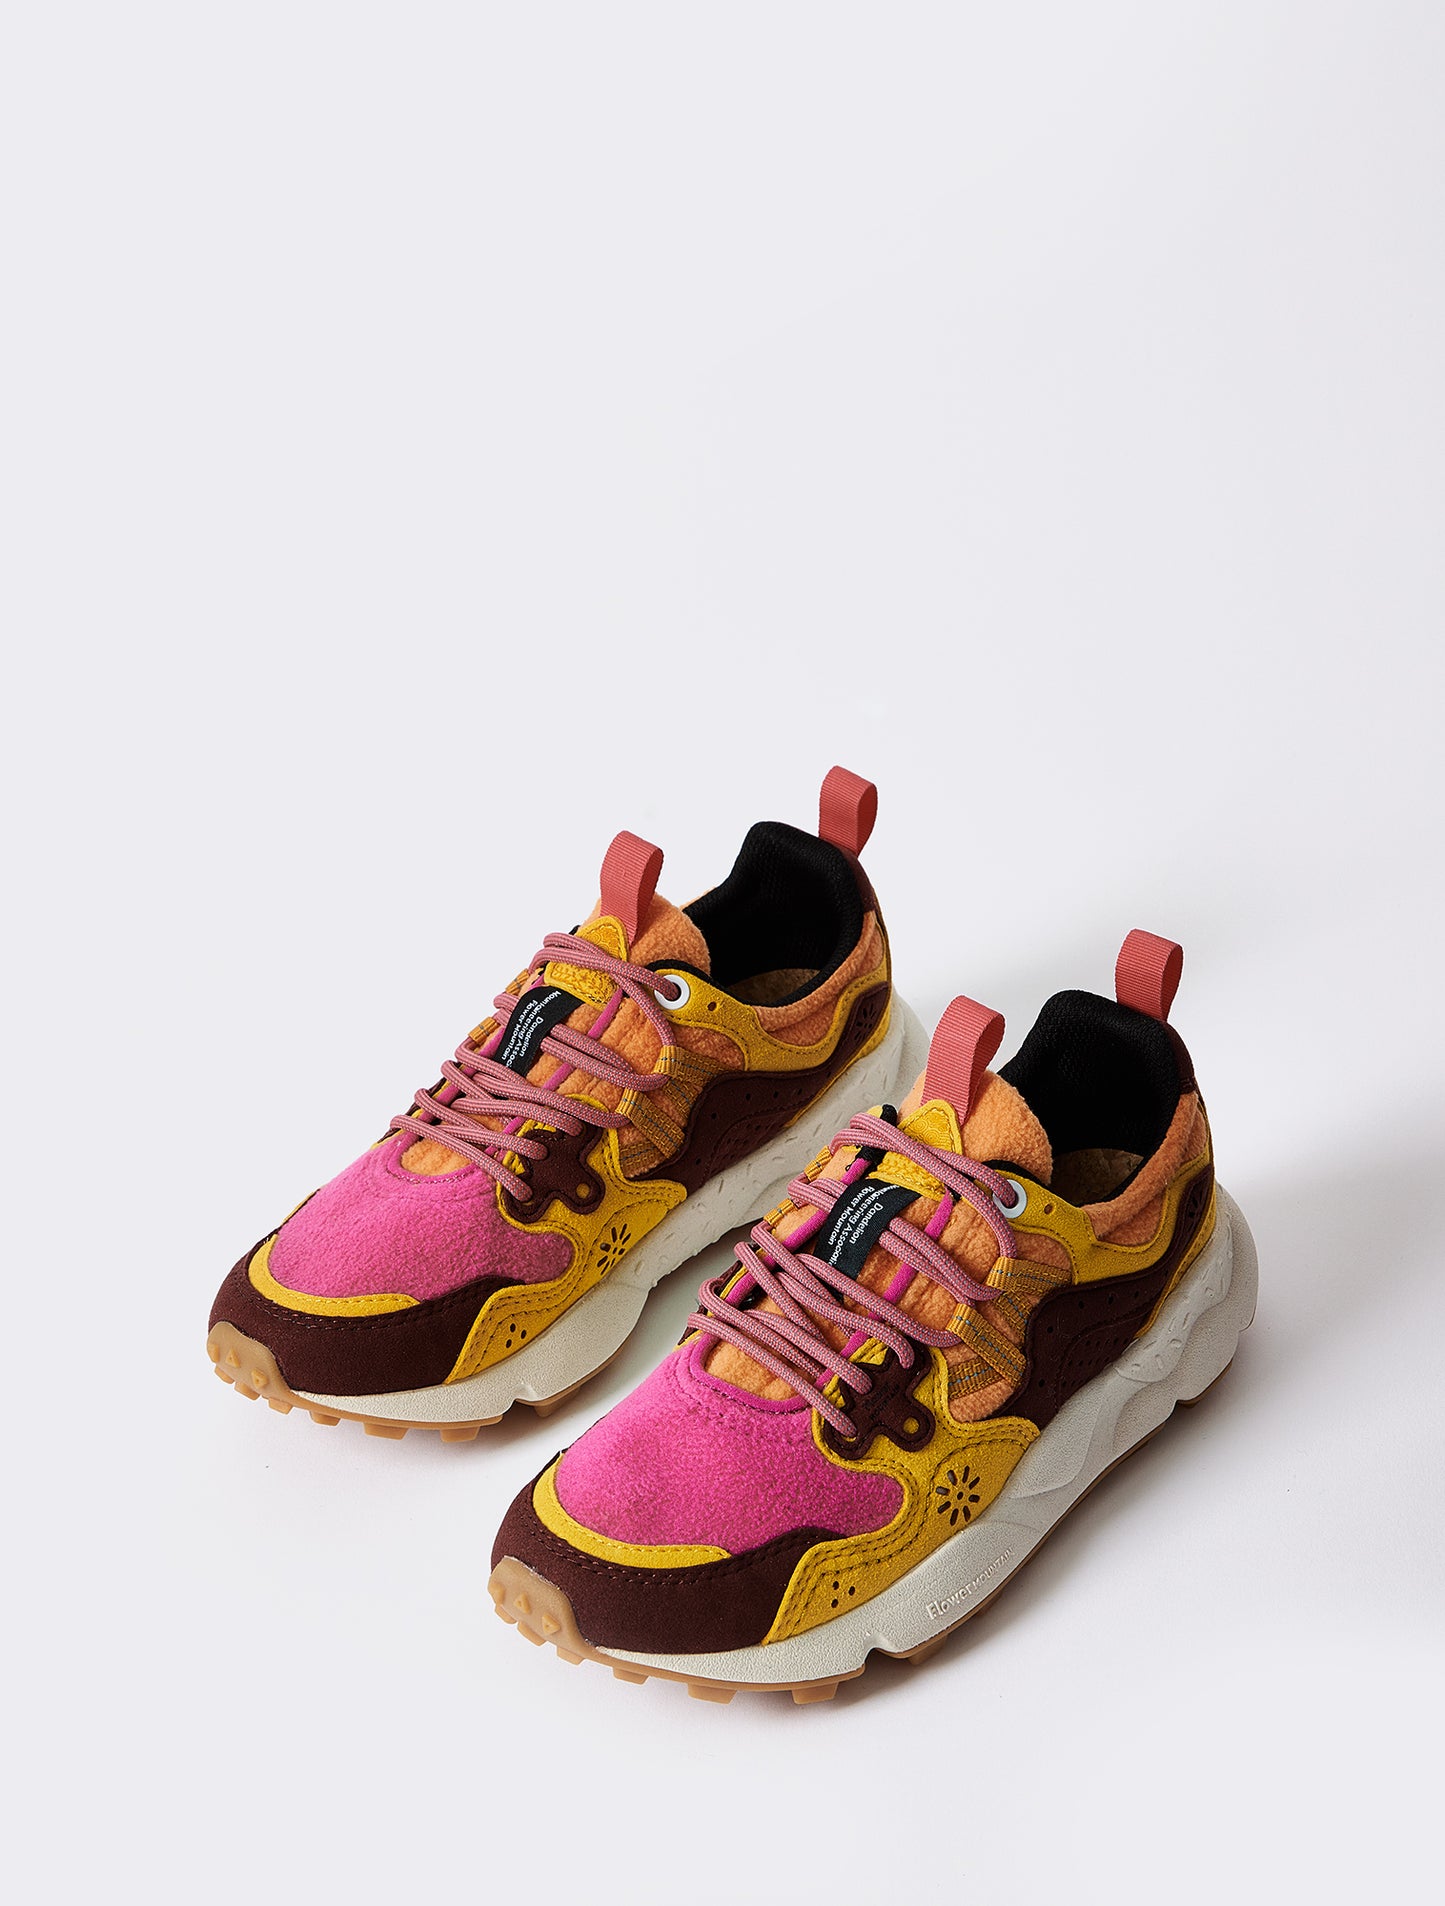 Flower Mountain Yamano 3 Uni Faux Leather And Synthetic Sneakers - Fuchsia-Orange